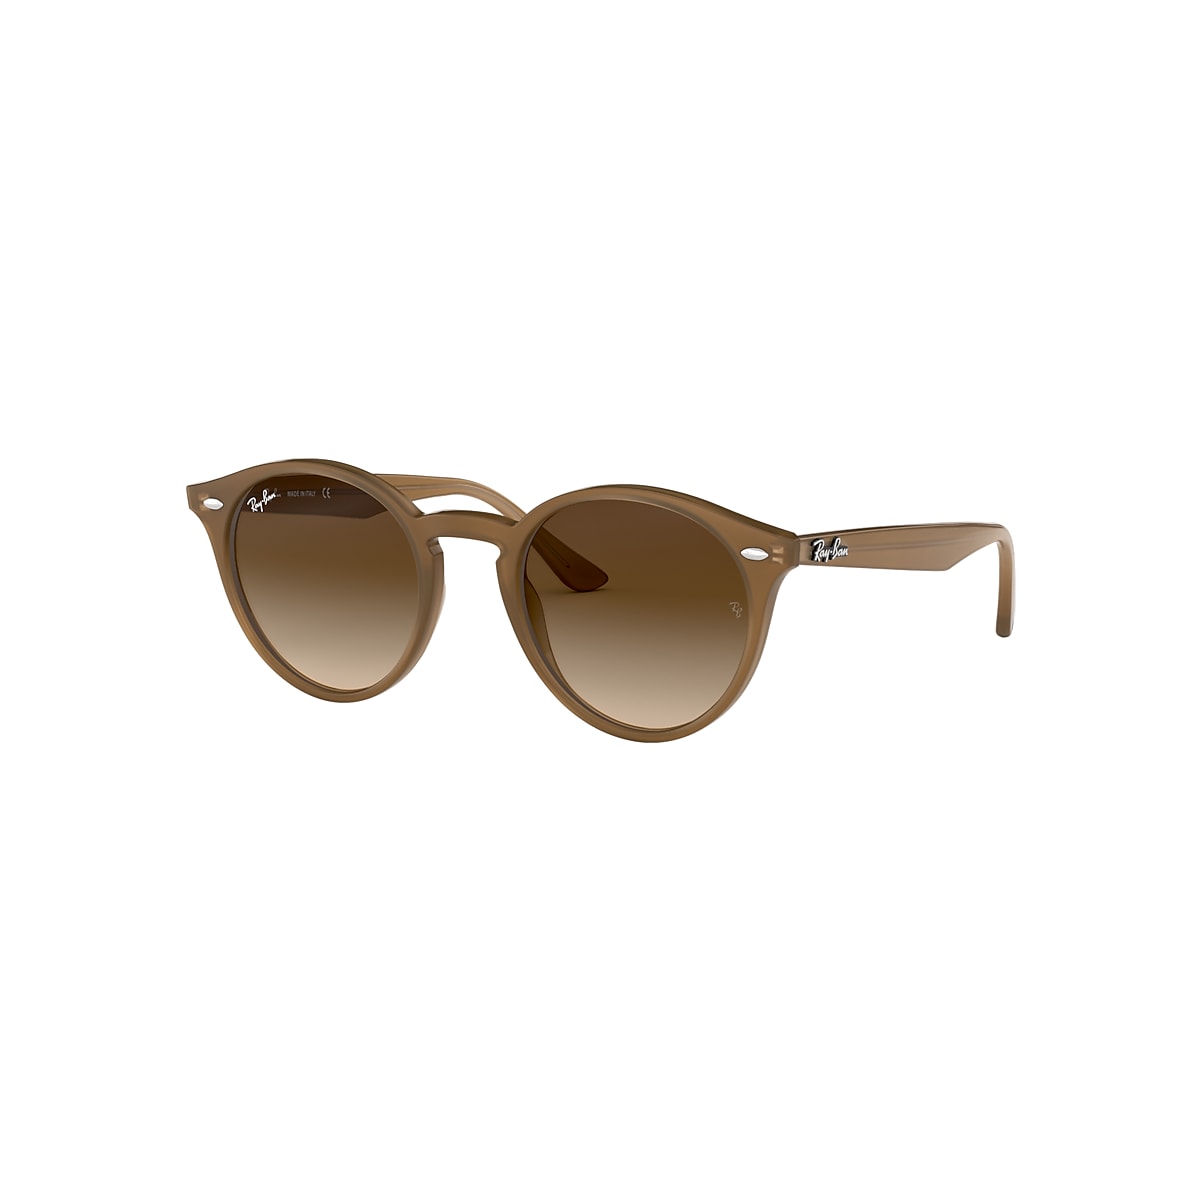 RB2180 Sunglasses in Light Brown and Brown - RB2180 | Ray-Ban® US